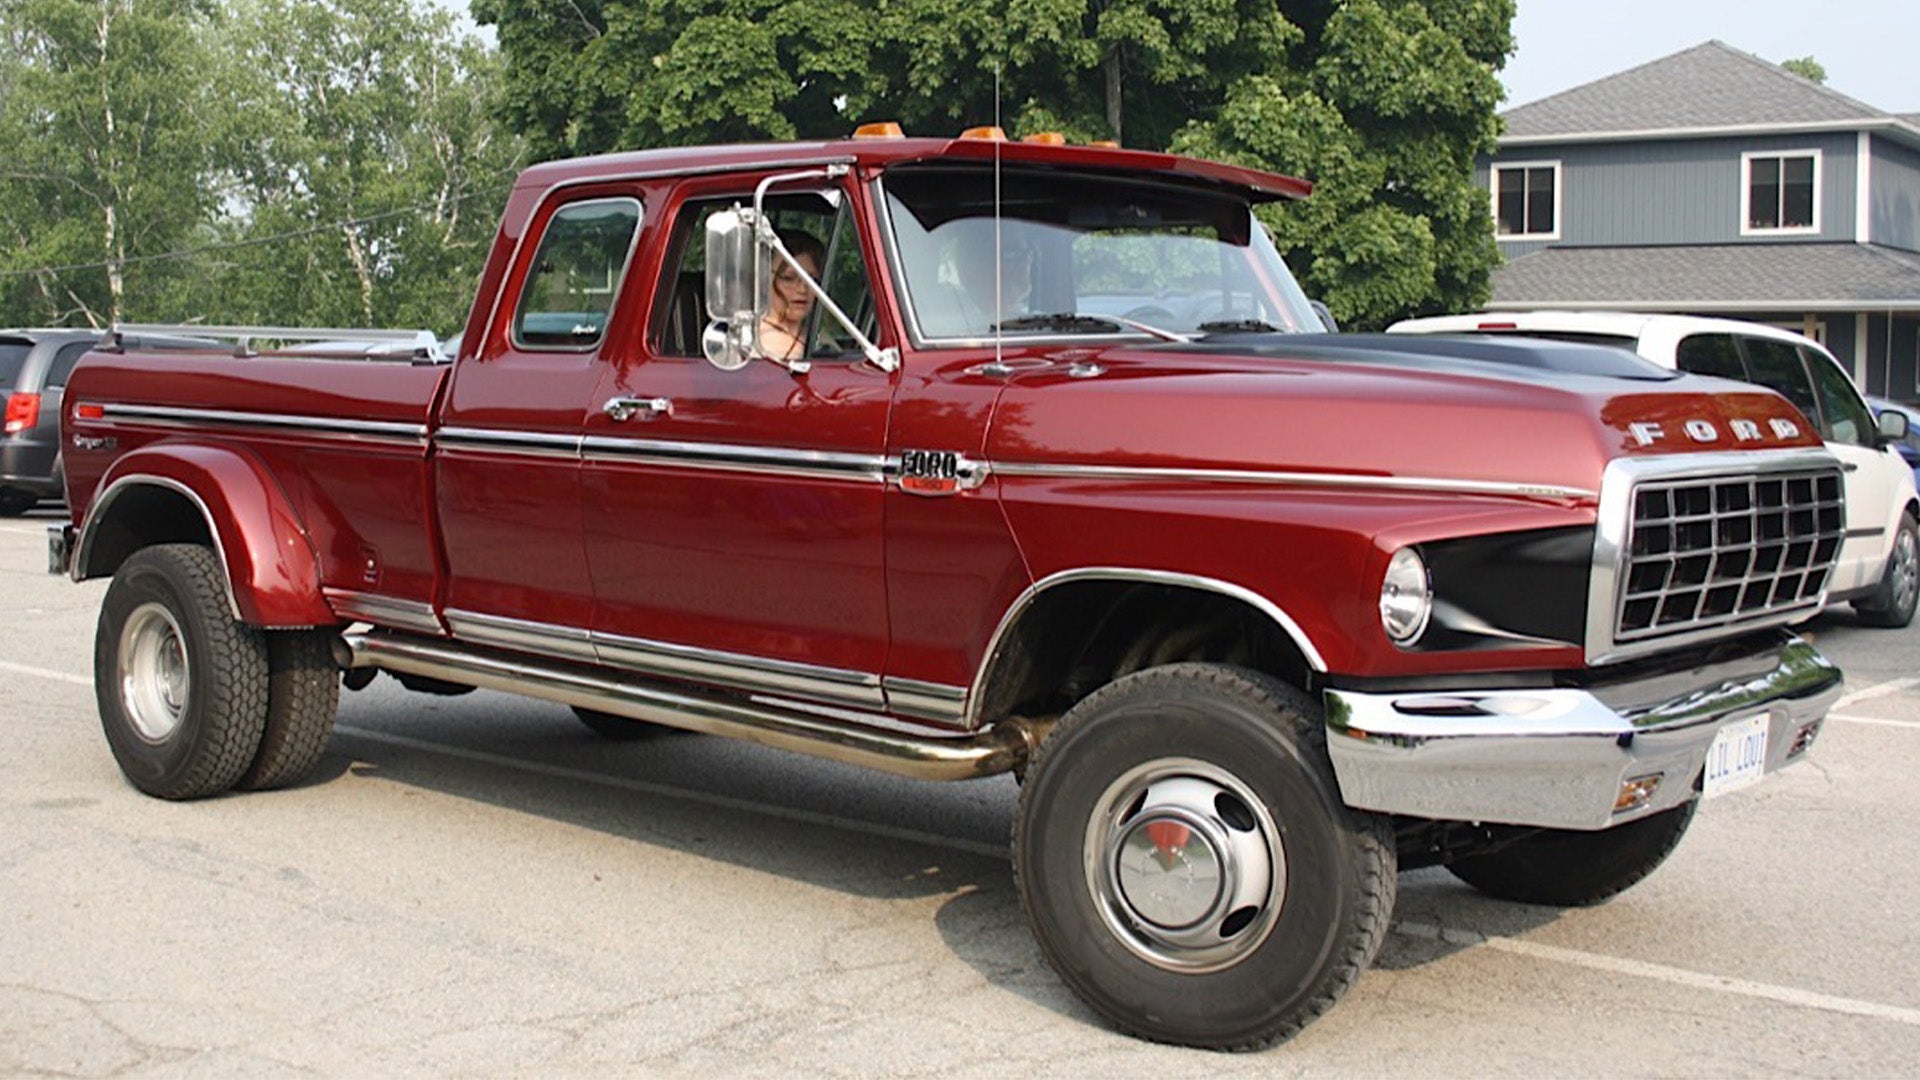 A Unique Hand-Built 1975 Ford Dually with a Custom Semi-Truck Front